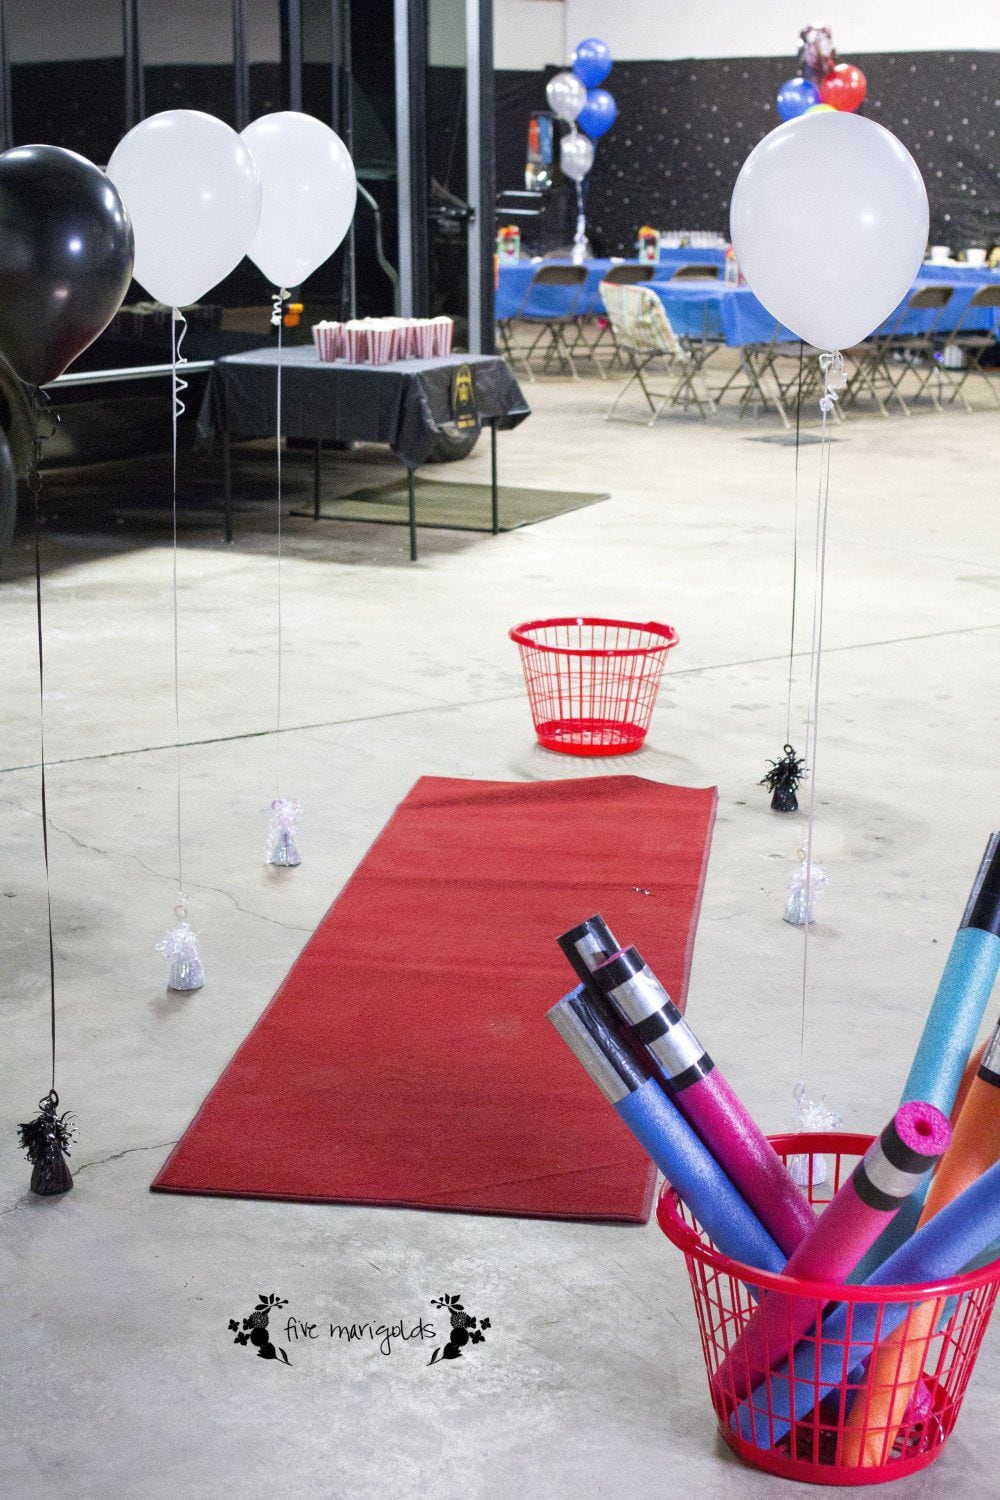 Star Wars Birthday Party Jedi Training Course with Balloons and Pool Noodles | www.fivemarigolds.com